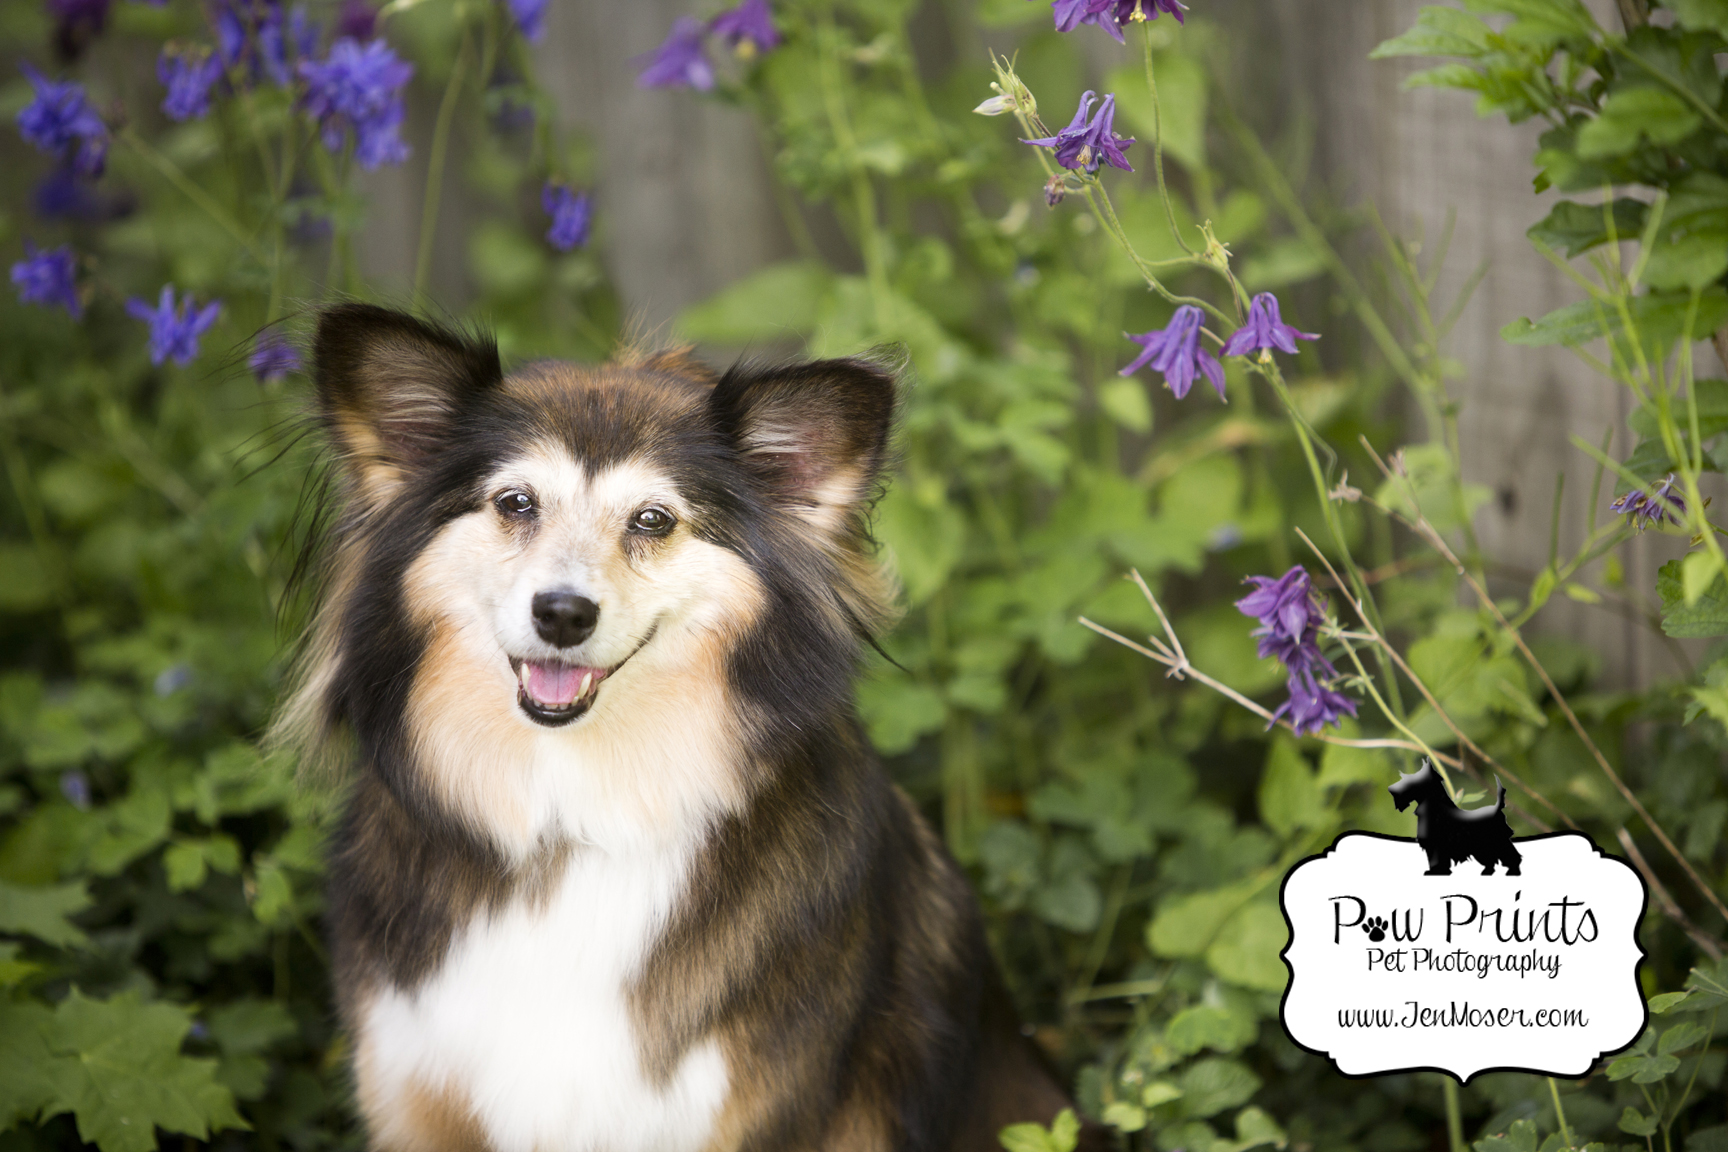 Indiana Pet Photographer_Paw Prints Pet Photography_Jen Moser_Pet Photography_Fort Wayne Pet Photographer_Pet Photography Session_Dog Photography_Dog in purple flowers